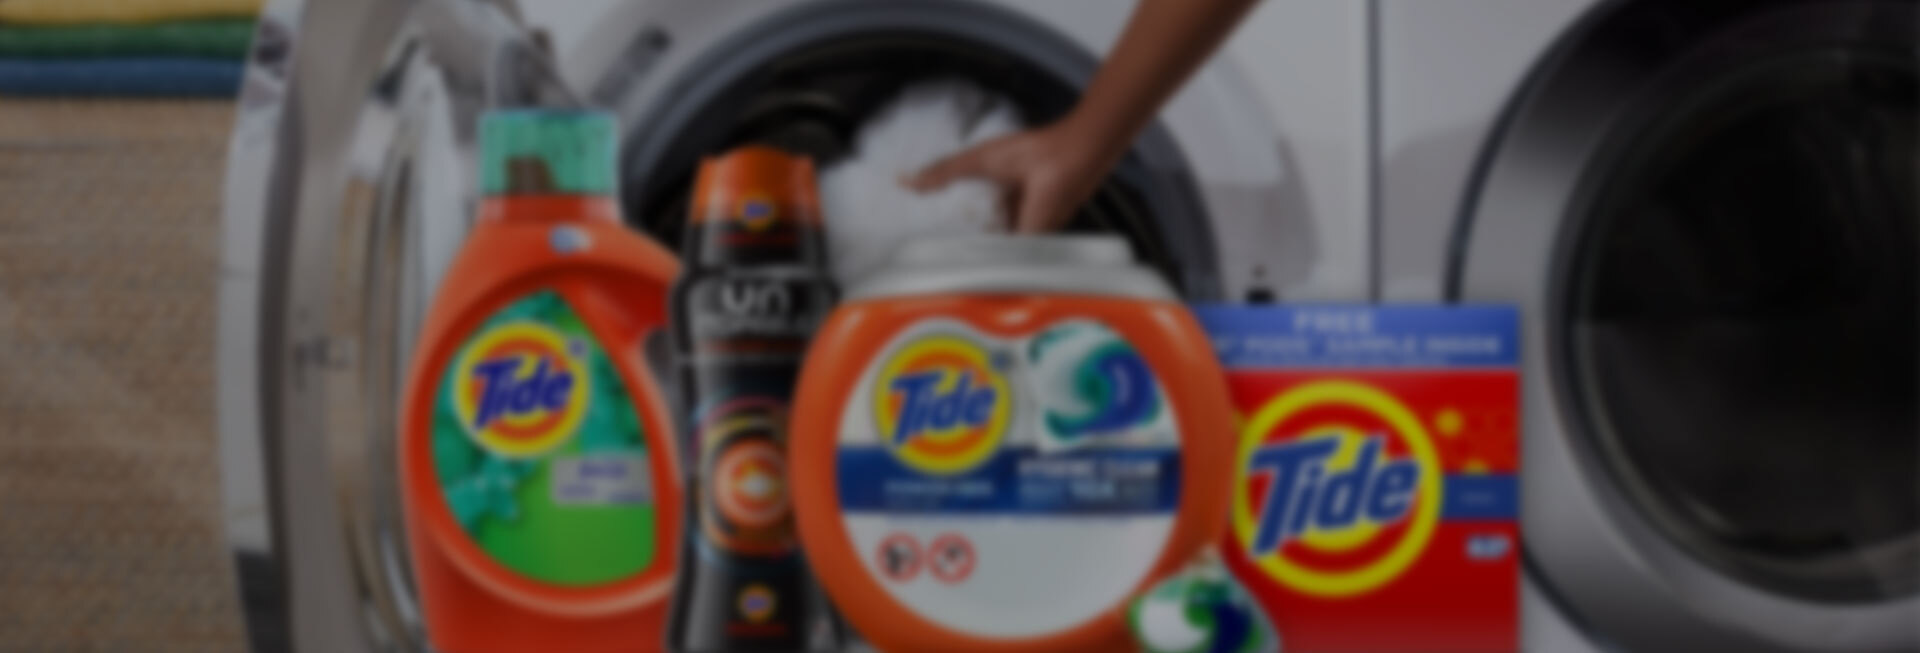 Various Tide products in front of a washer